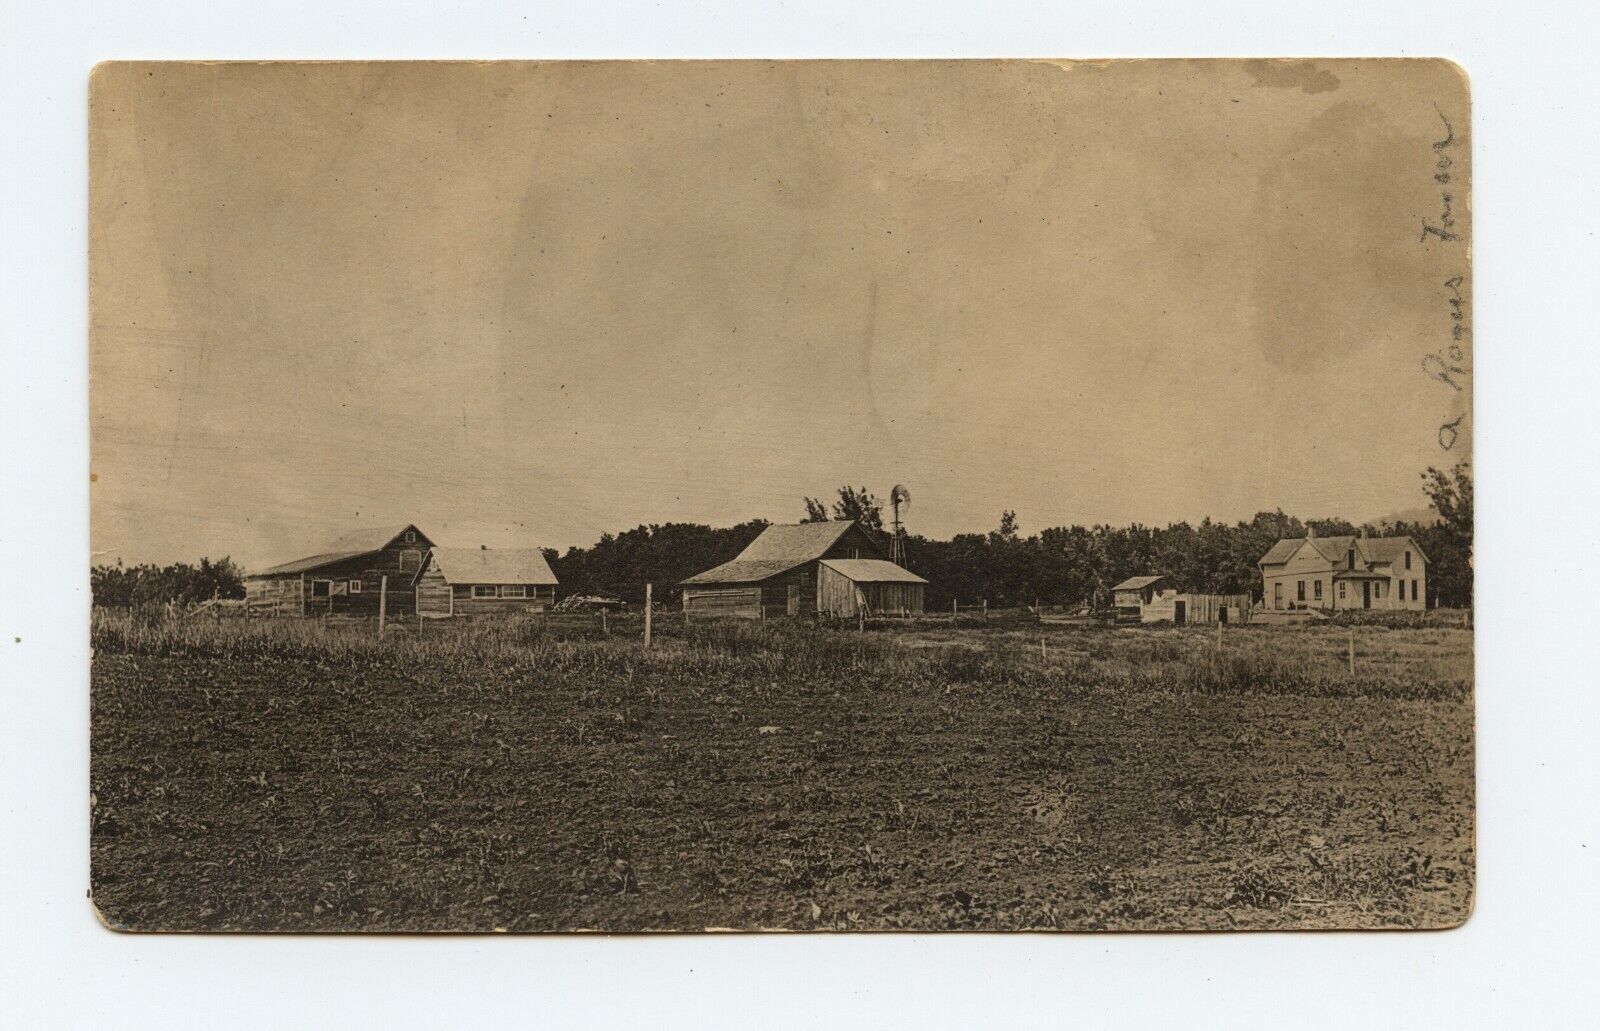 FARM SCENE old real photo postcard HILLS MN c1910 by rock rapids & luverne. rppc